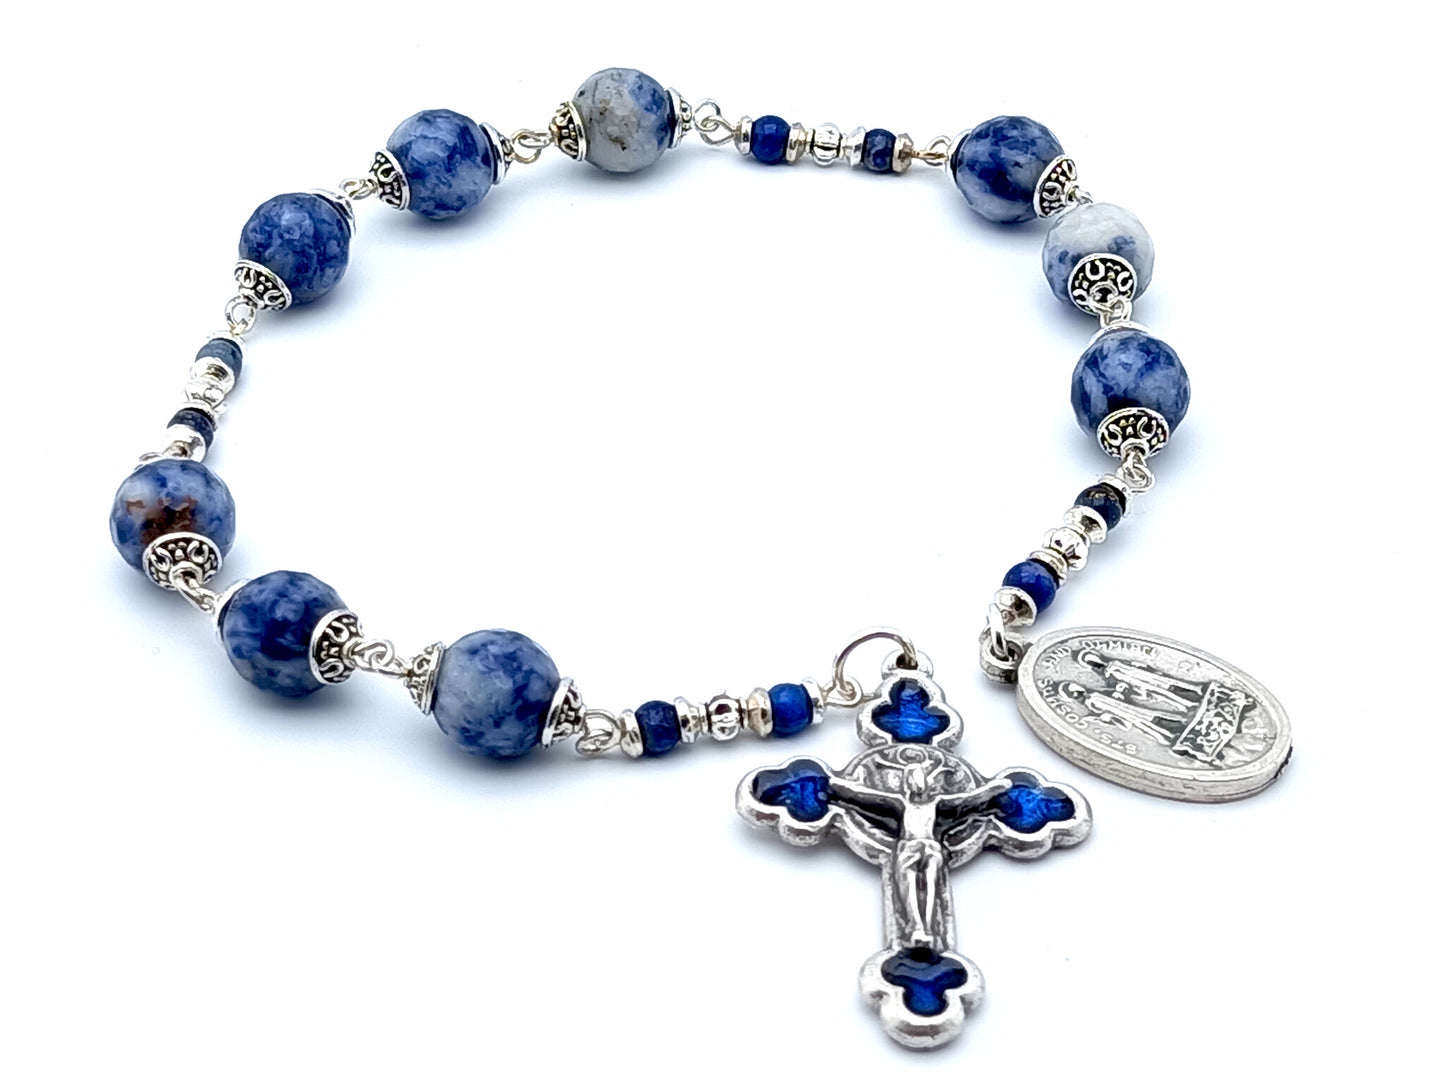 Saint Cosmas and Damian unique rosary beads prayer chaplet with blue agate gemstone beads, blue enamel Saint benedict crucifix and silver end medal.